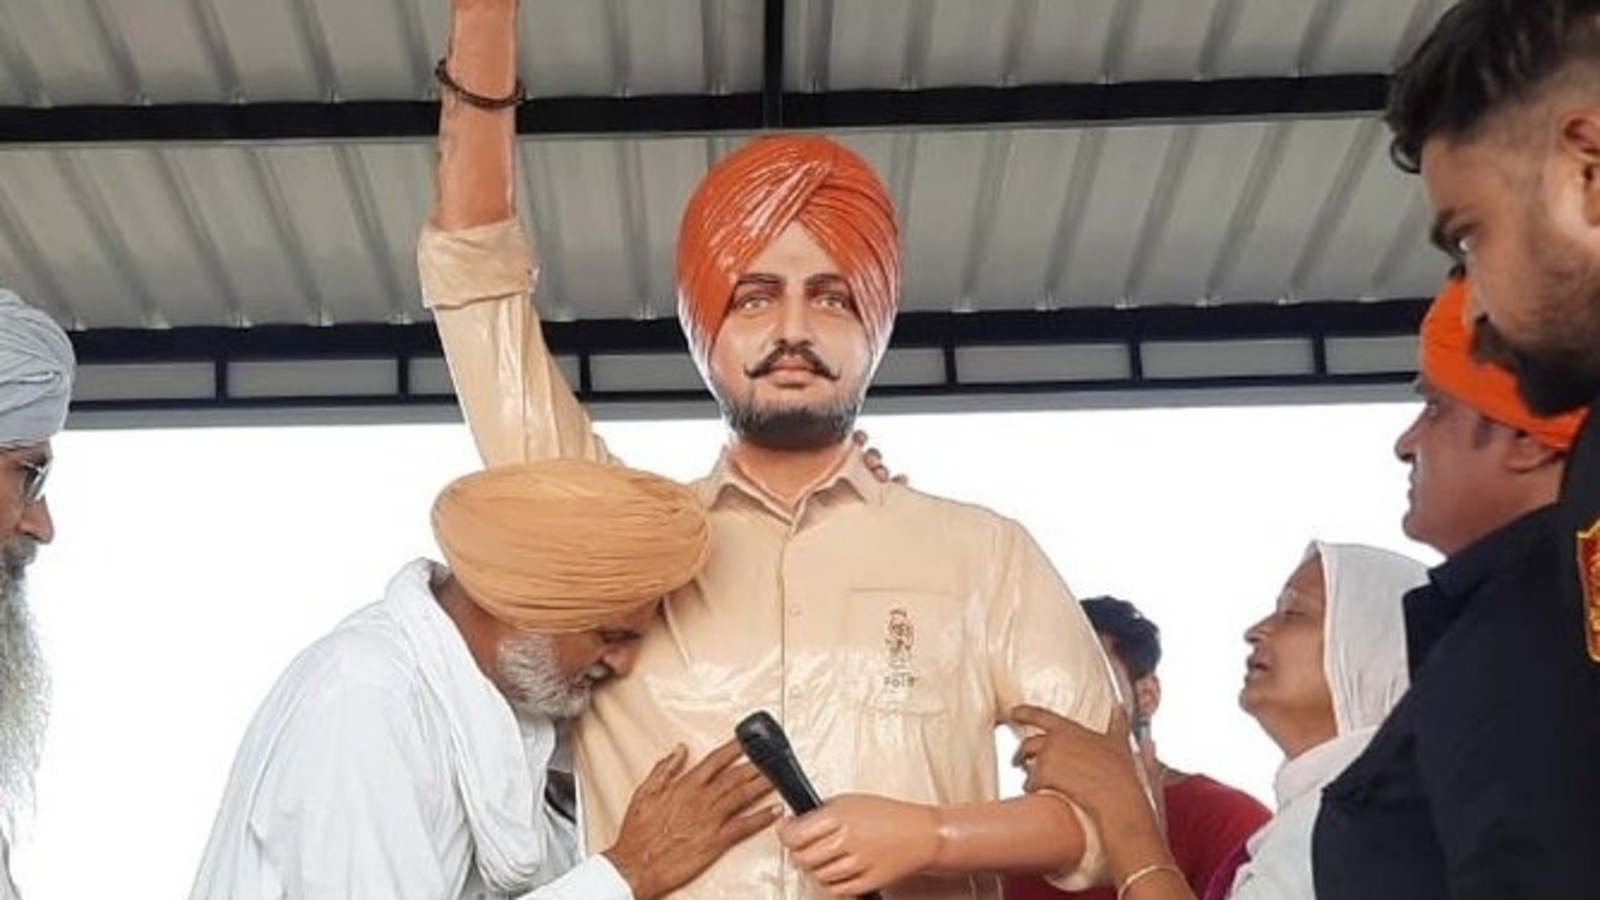 Sidhu Moose Wala’s father breaks down while unveiling his statue: ‘Can’t bear to see son as statue at 28’